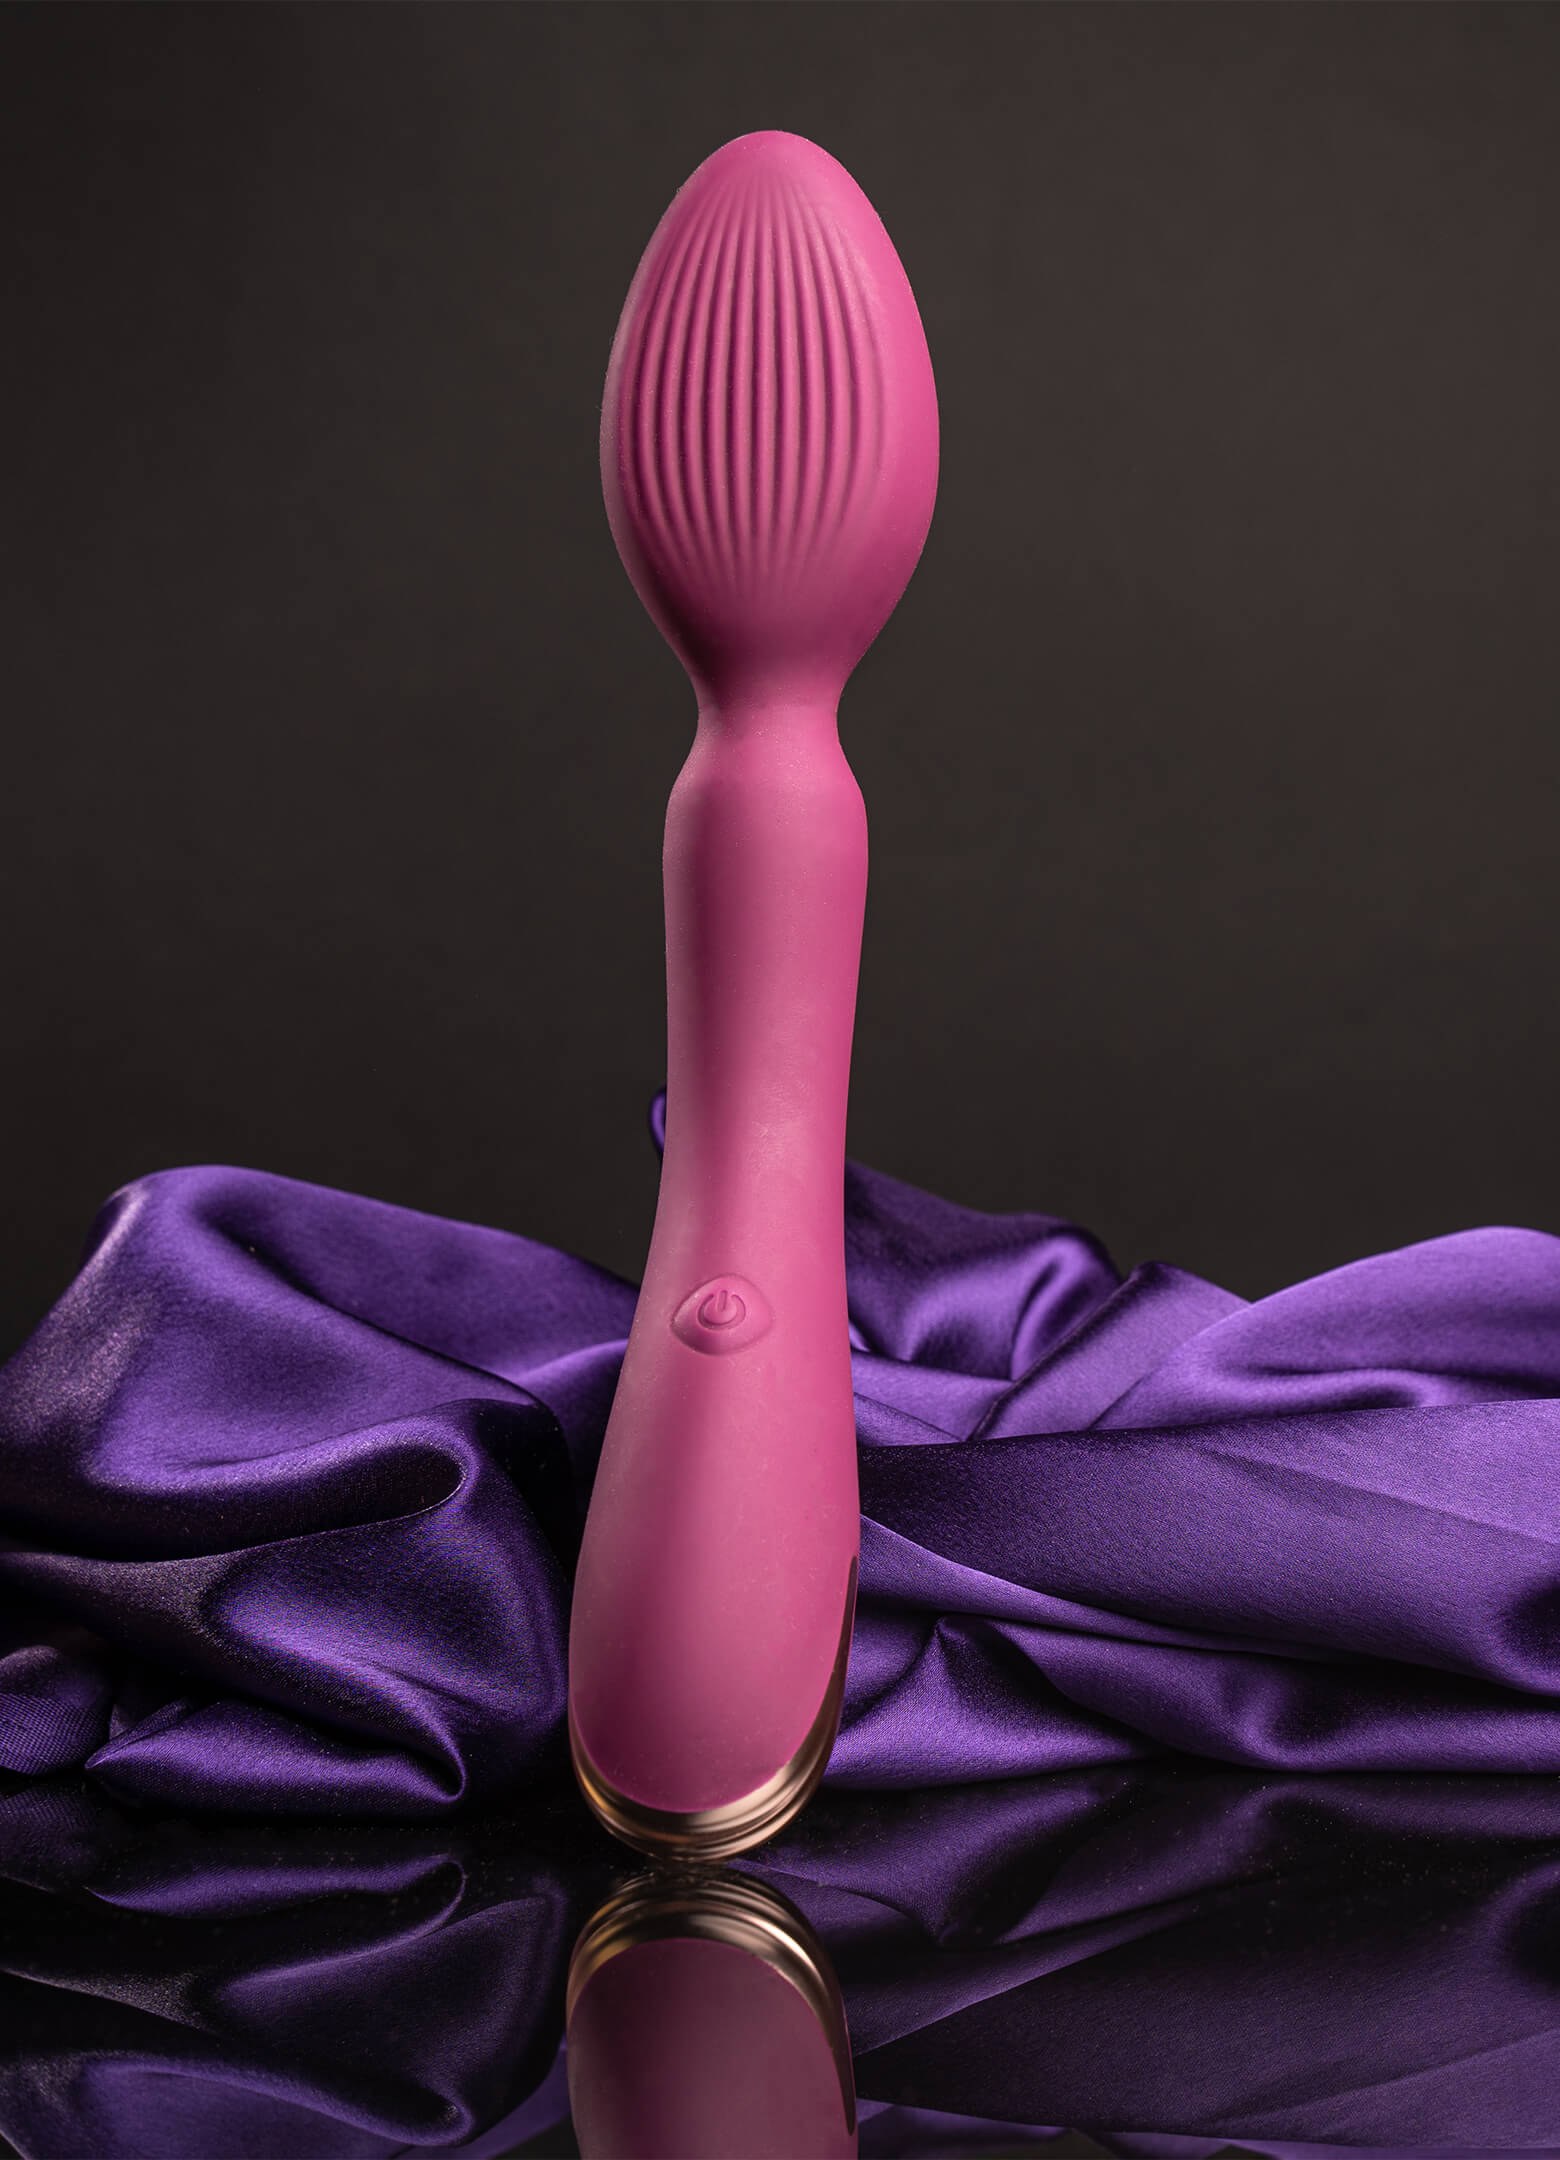 Burgundy egged shaped head wand vibrator with a ribbed surface.